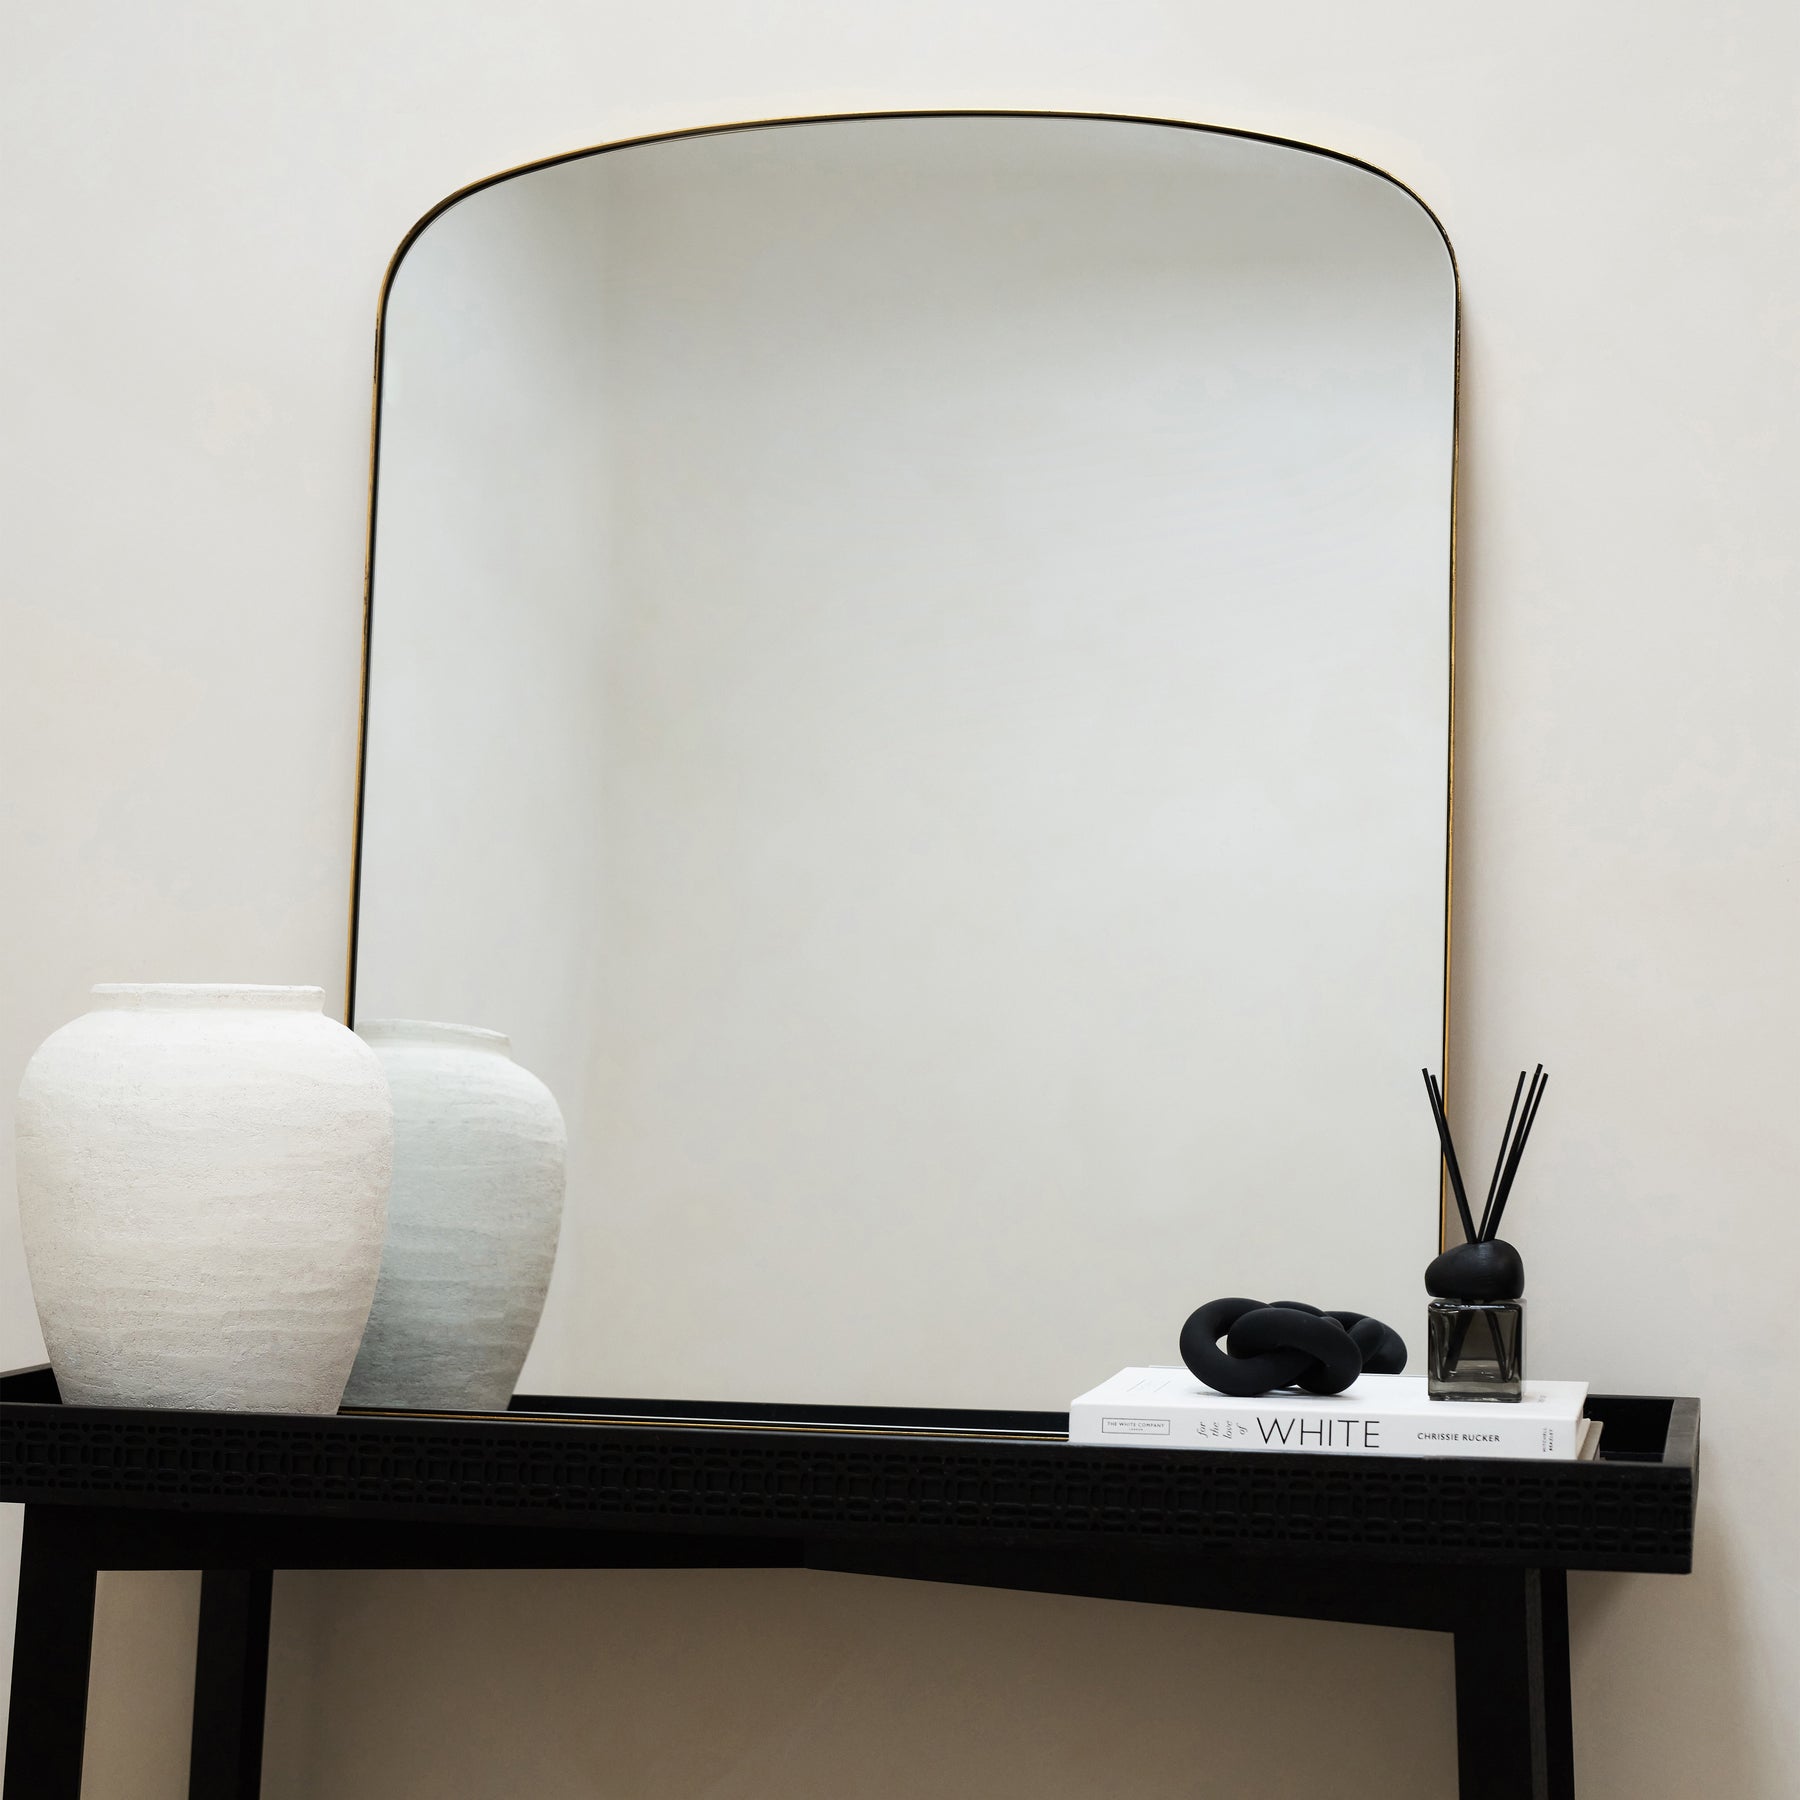 Bowness - Gold Contemporary Arched Metal Wall Mirror 90cm x 75cm